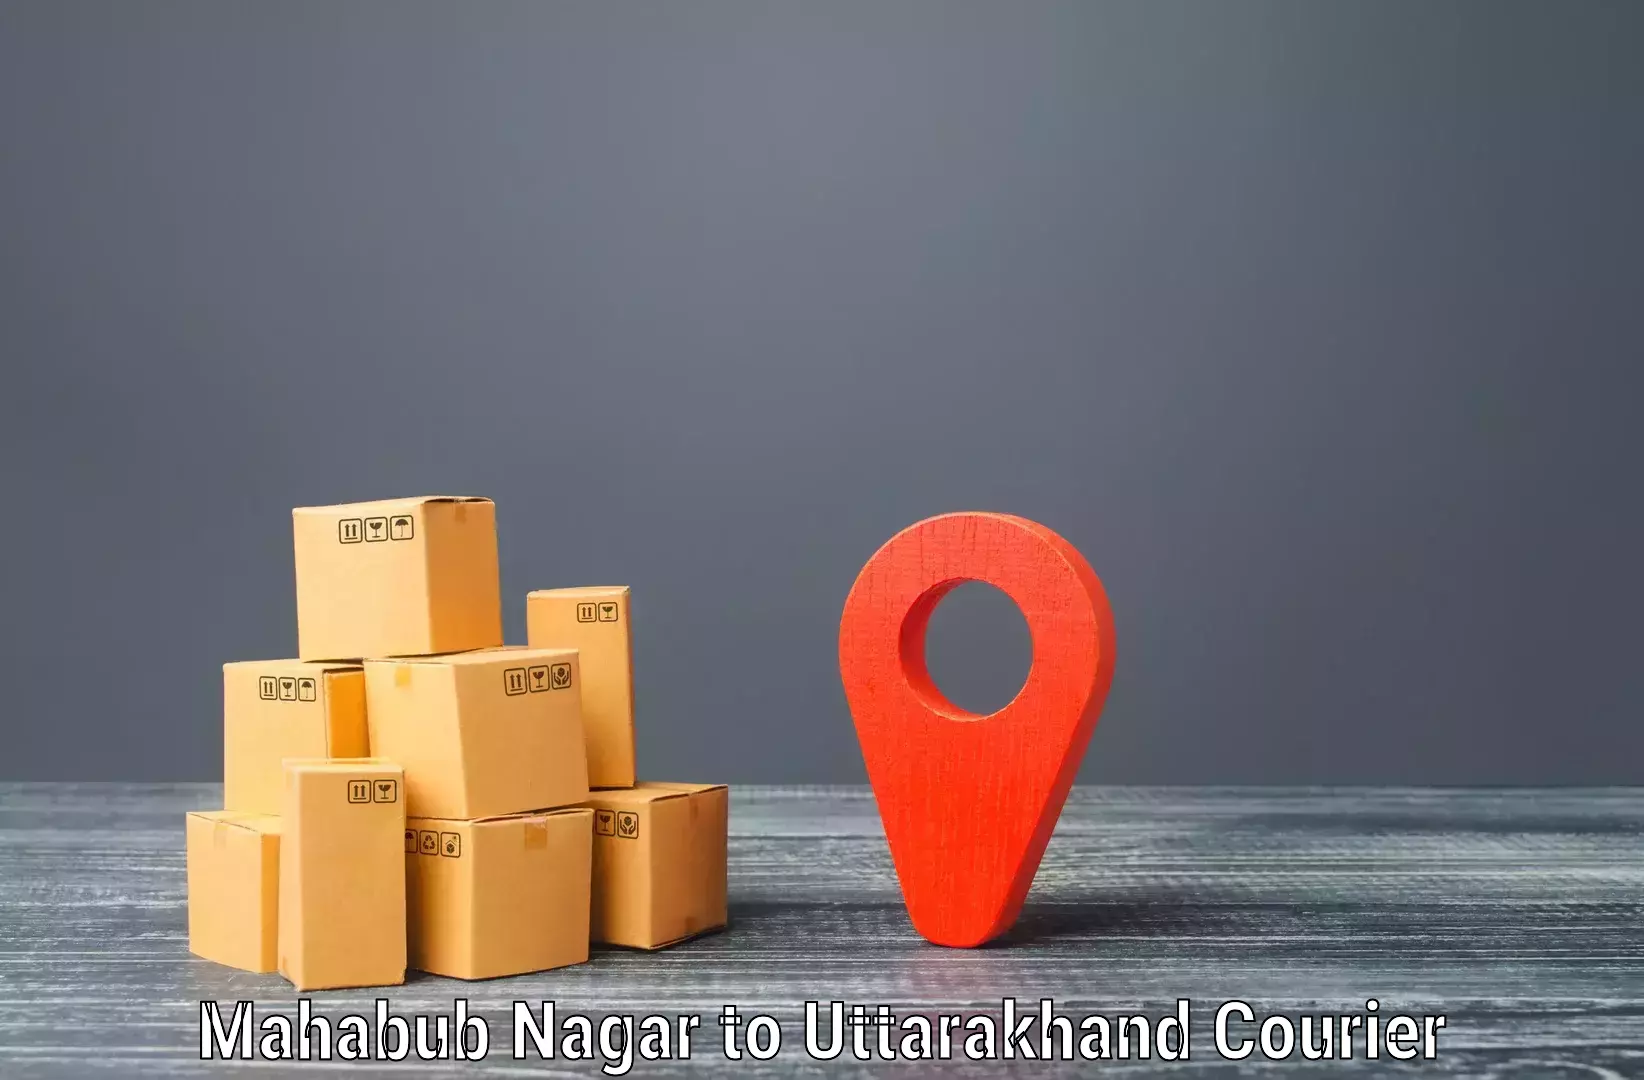 Flexible delivery schedules Mahabub Nagar to Rudrapur